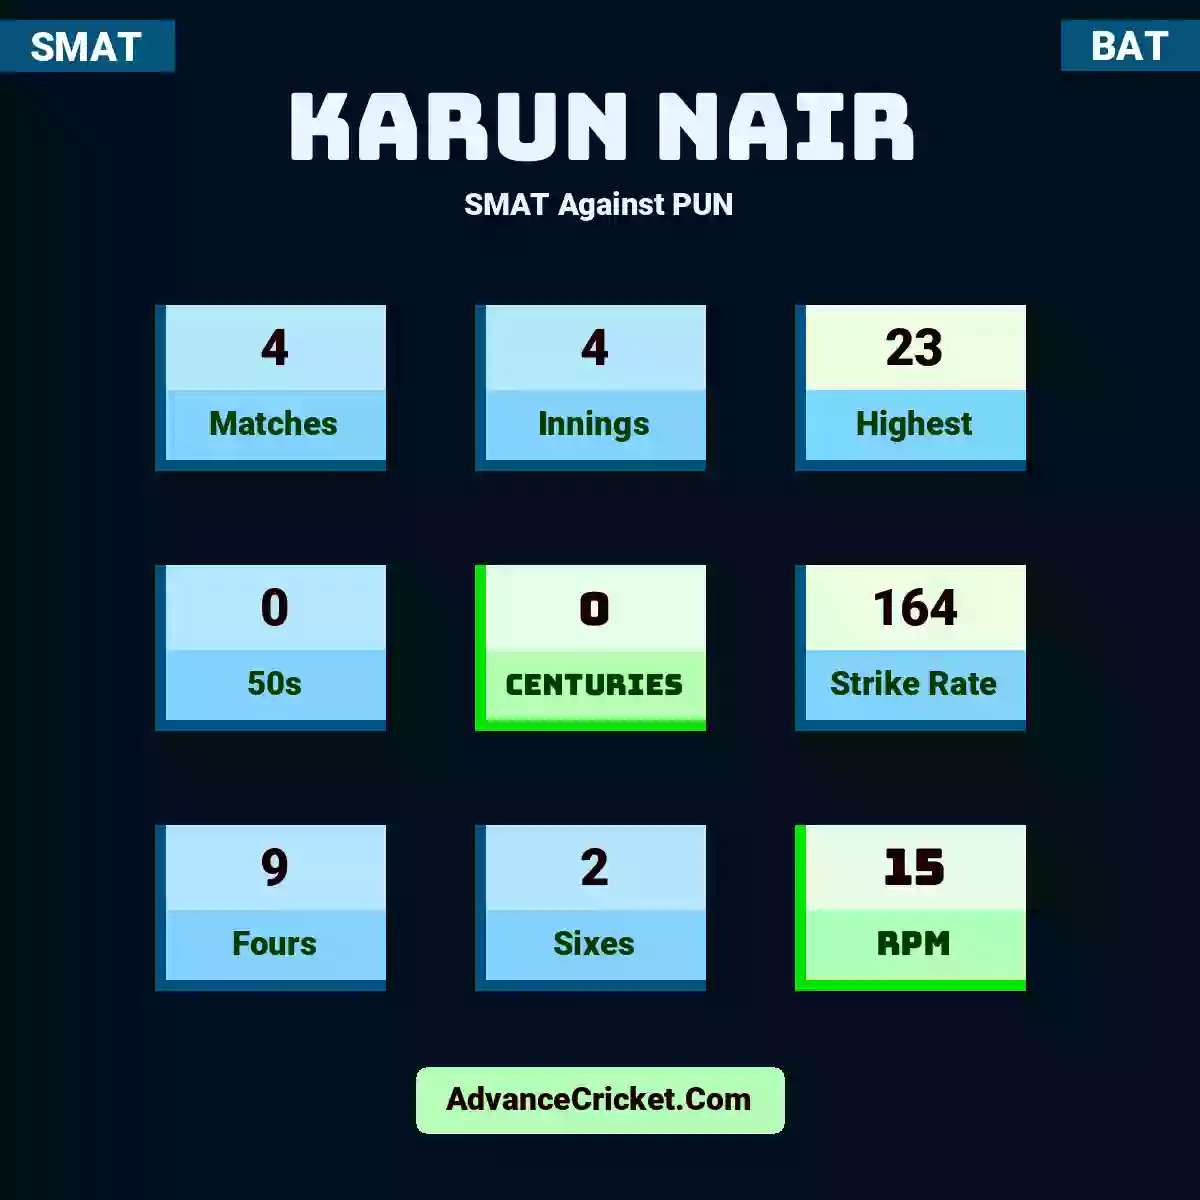 Karun Nair SMAT  Against PUN, Karun Nair played 4 matches, scored 23 runs as highest, 0 half-centuries, and 0 centuries, with a strike rate of 164. K.Nair hit 9 fours and 2 sixes, with an RPM of 15.